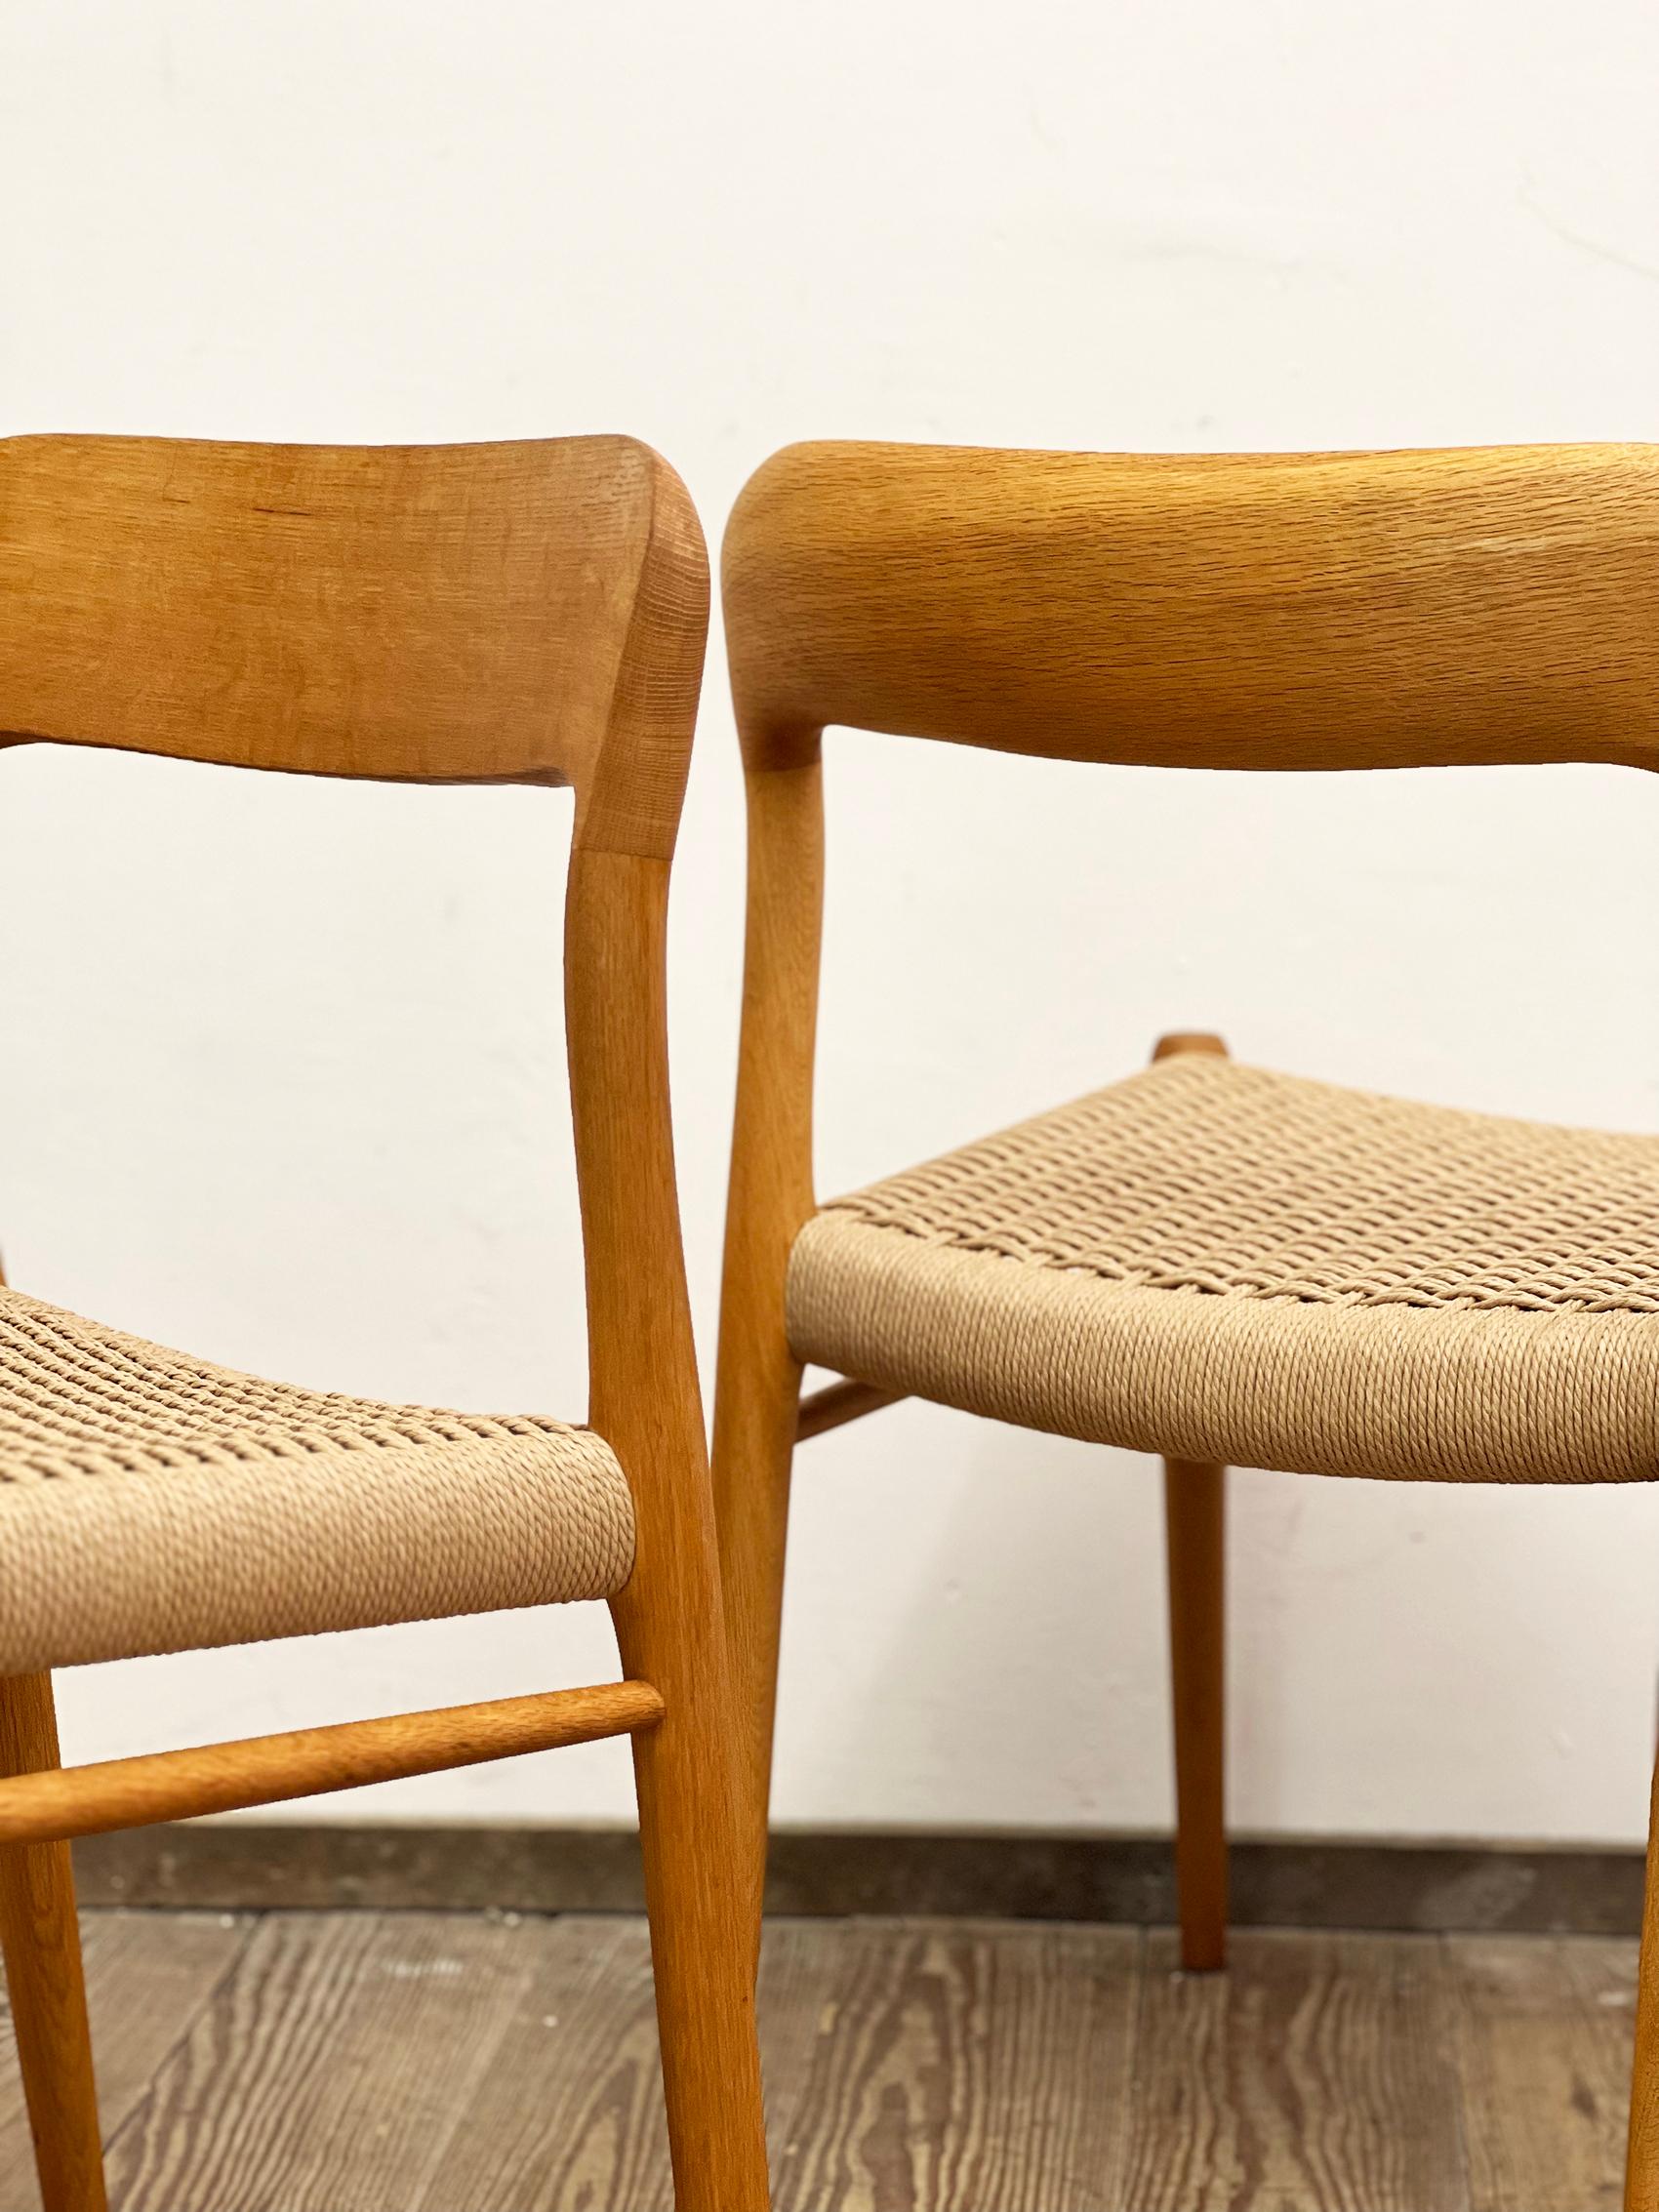 Pair of Mid-Century Oak Dining Chairs #75, Niels O. Møller for J. L. Moller For Sale 6